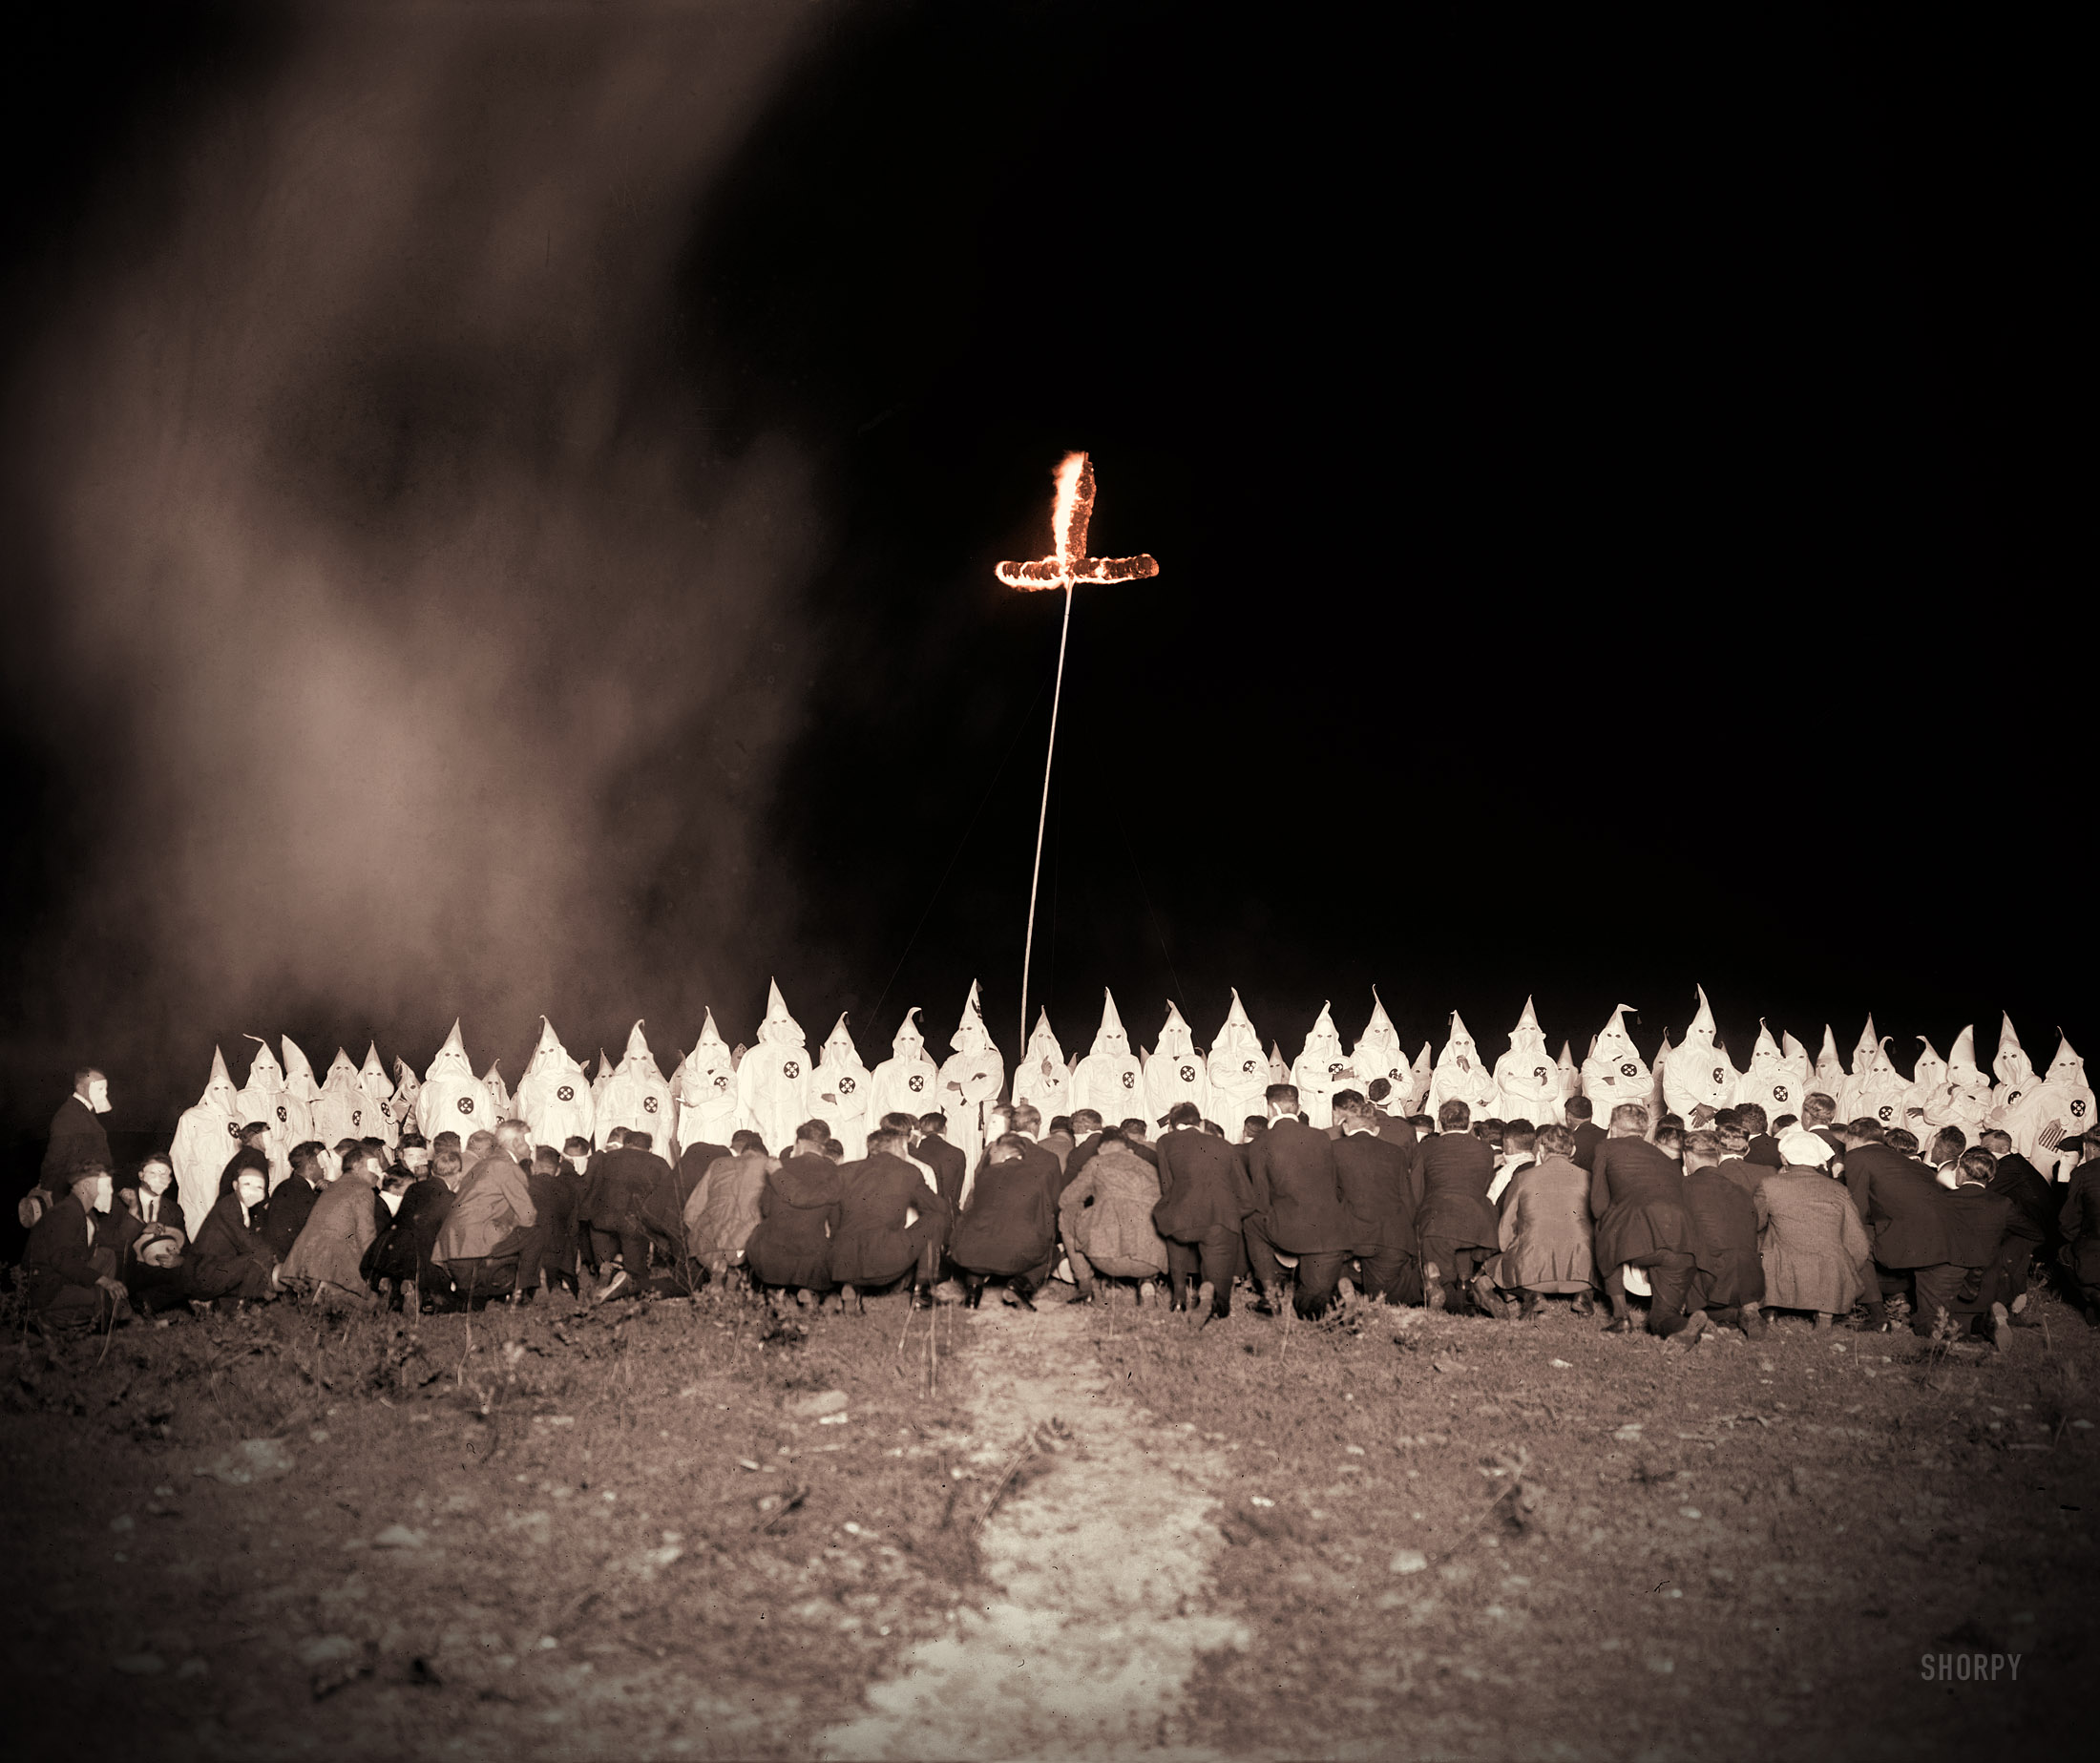 June 28, 1922. Washington, D.C., or vicinity. "Ku Klux Klan meeting." 8x10 inch glass negative, National Photo Company Collection. View full size.